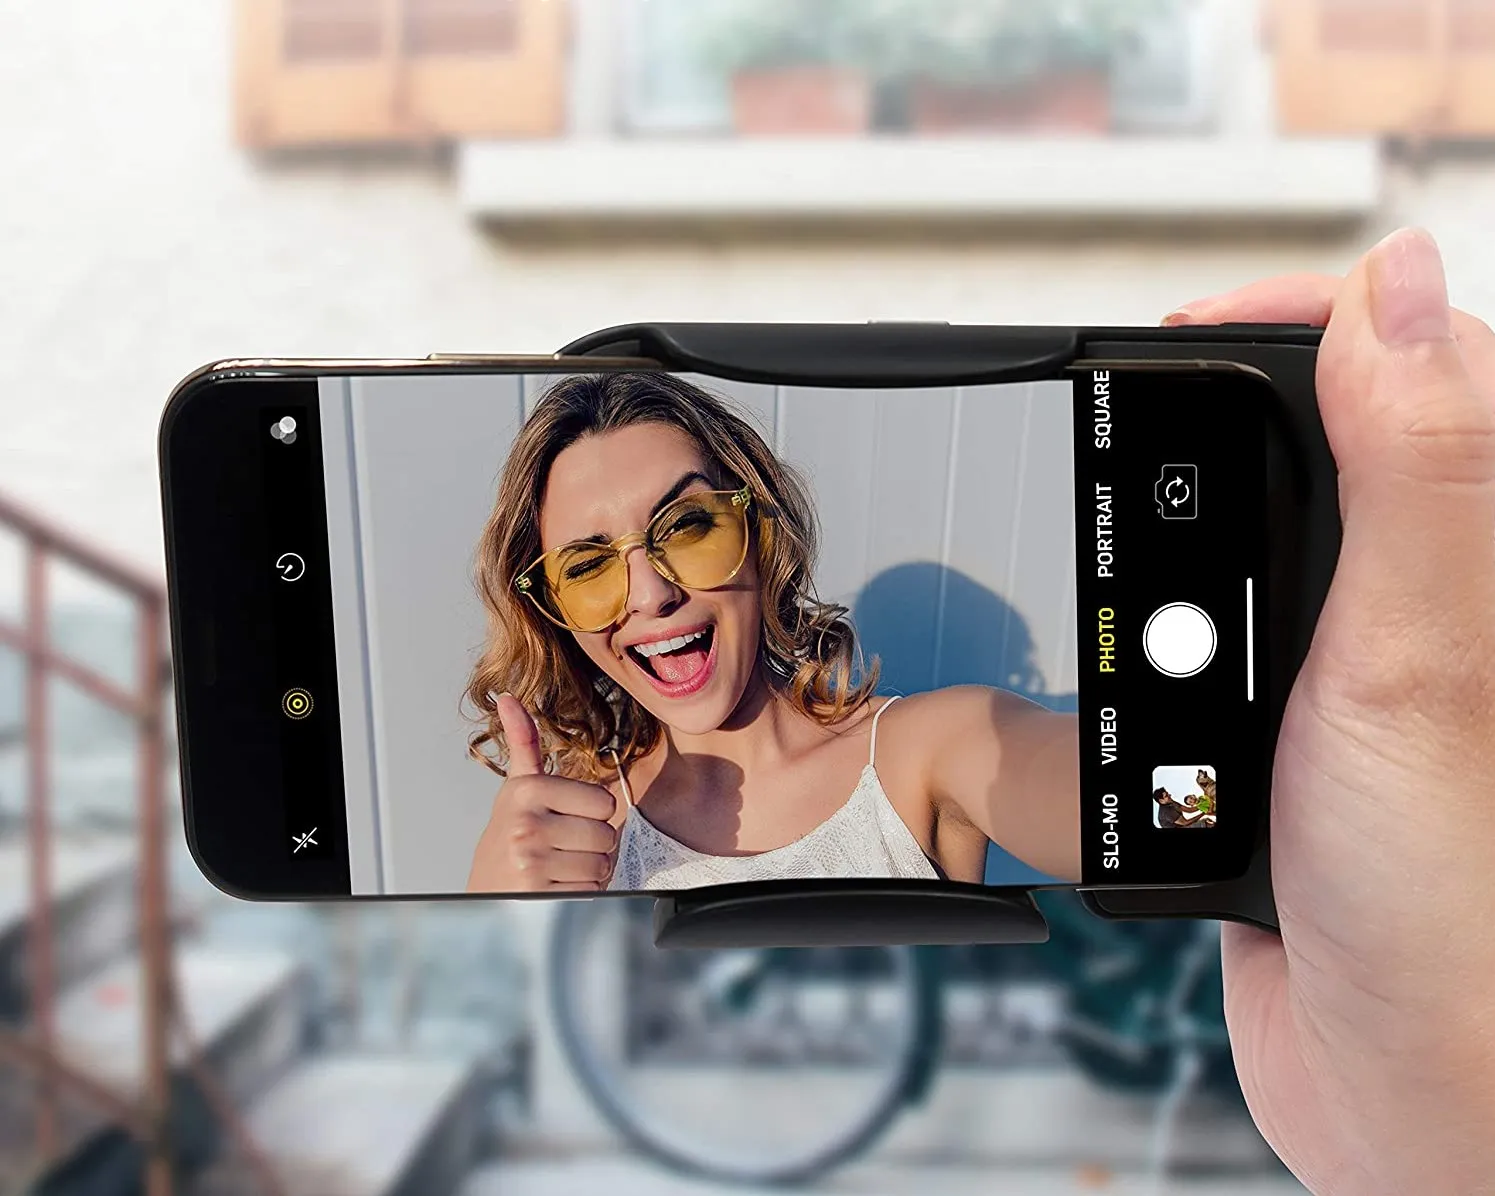 How To Change Camera Settings On IPhone For Selfie